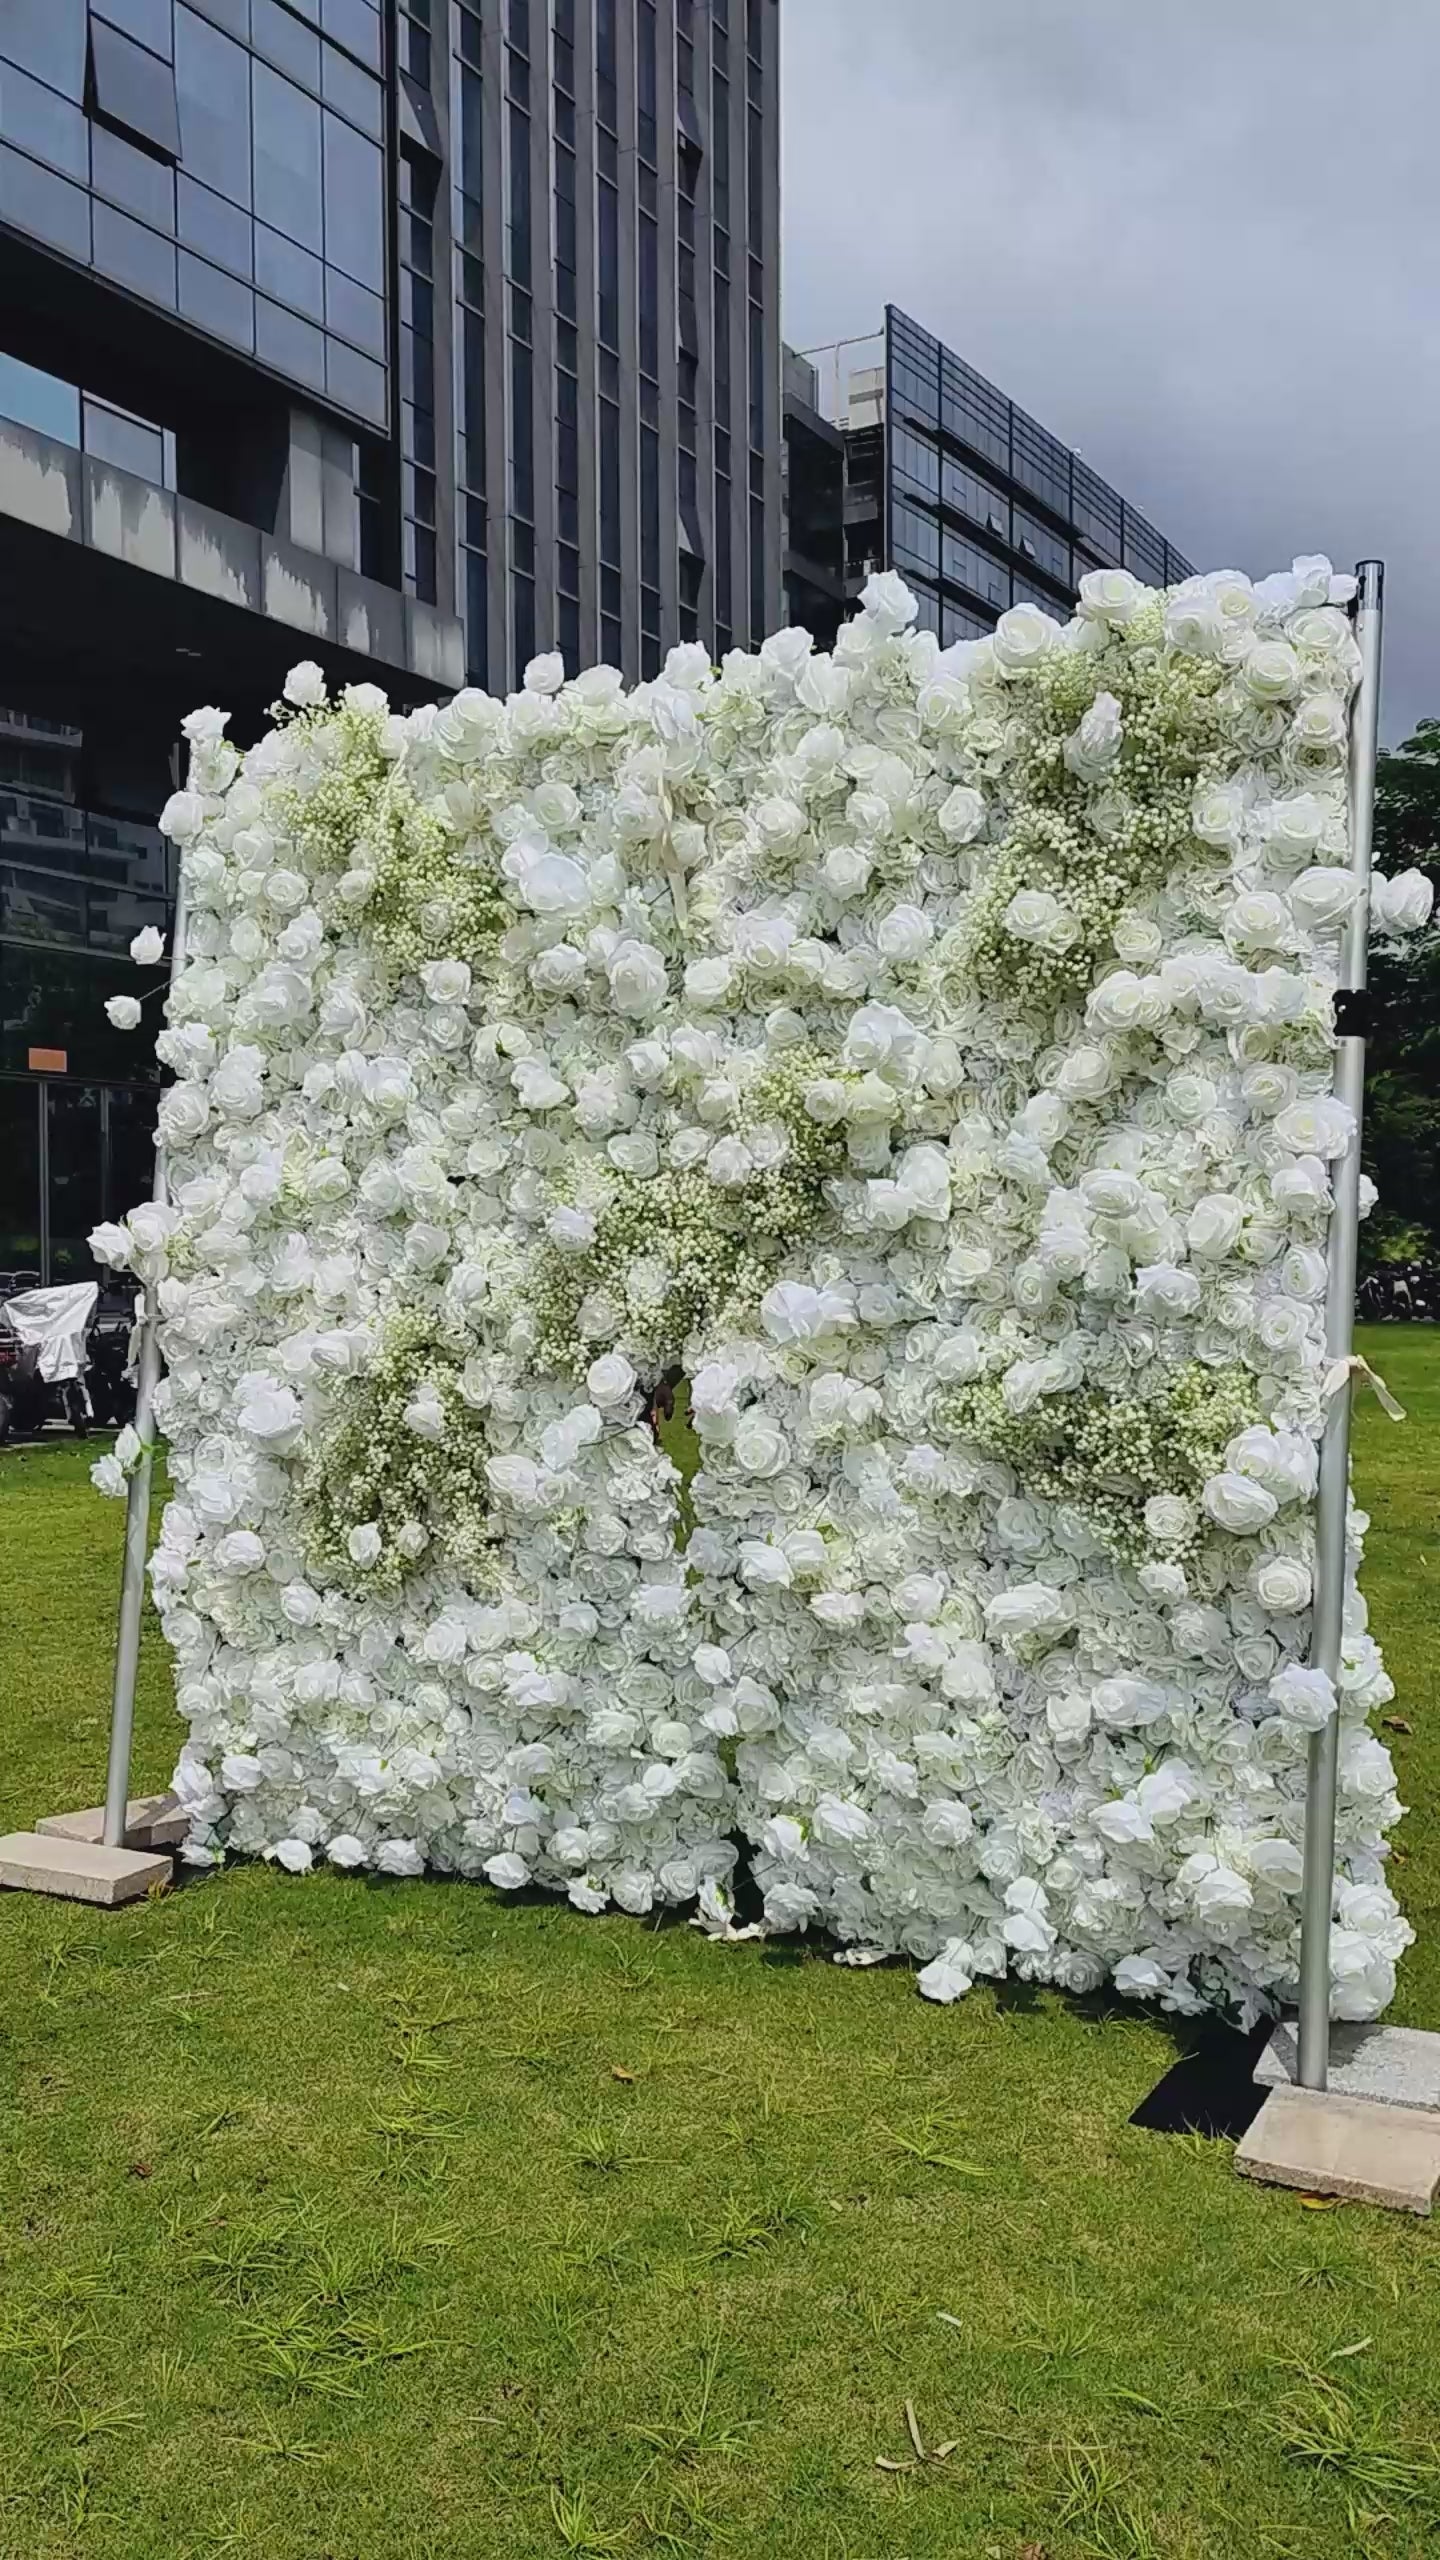 Elegant White &amp; Green Flower Wall Backdrop - Roll-Up Fabric Wall - Bridal Party Decor - Wedding Venues Celebration Floral Wall-VF-340-2